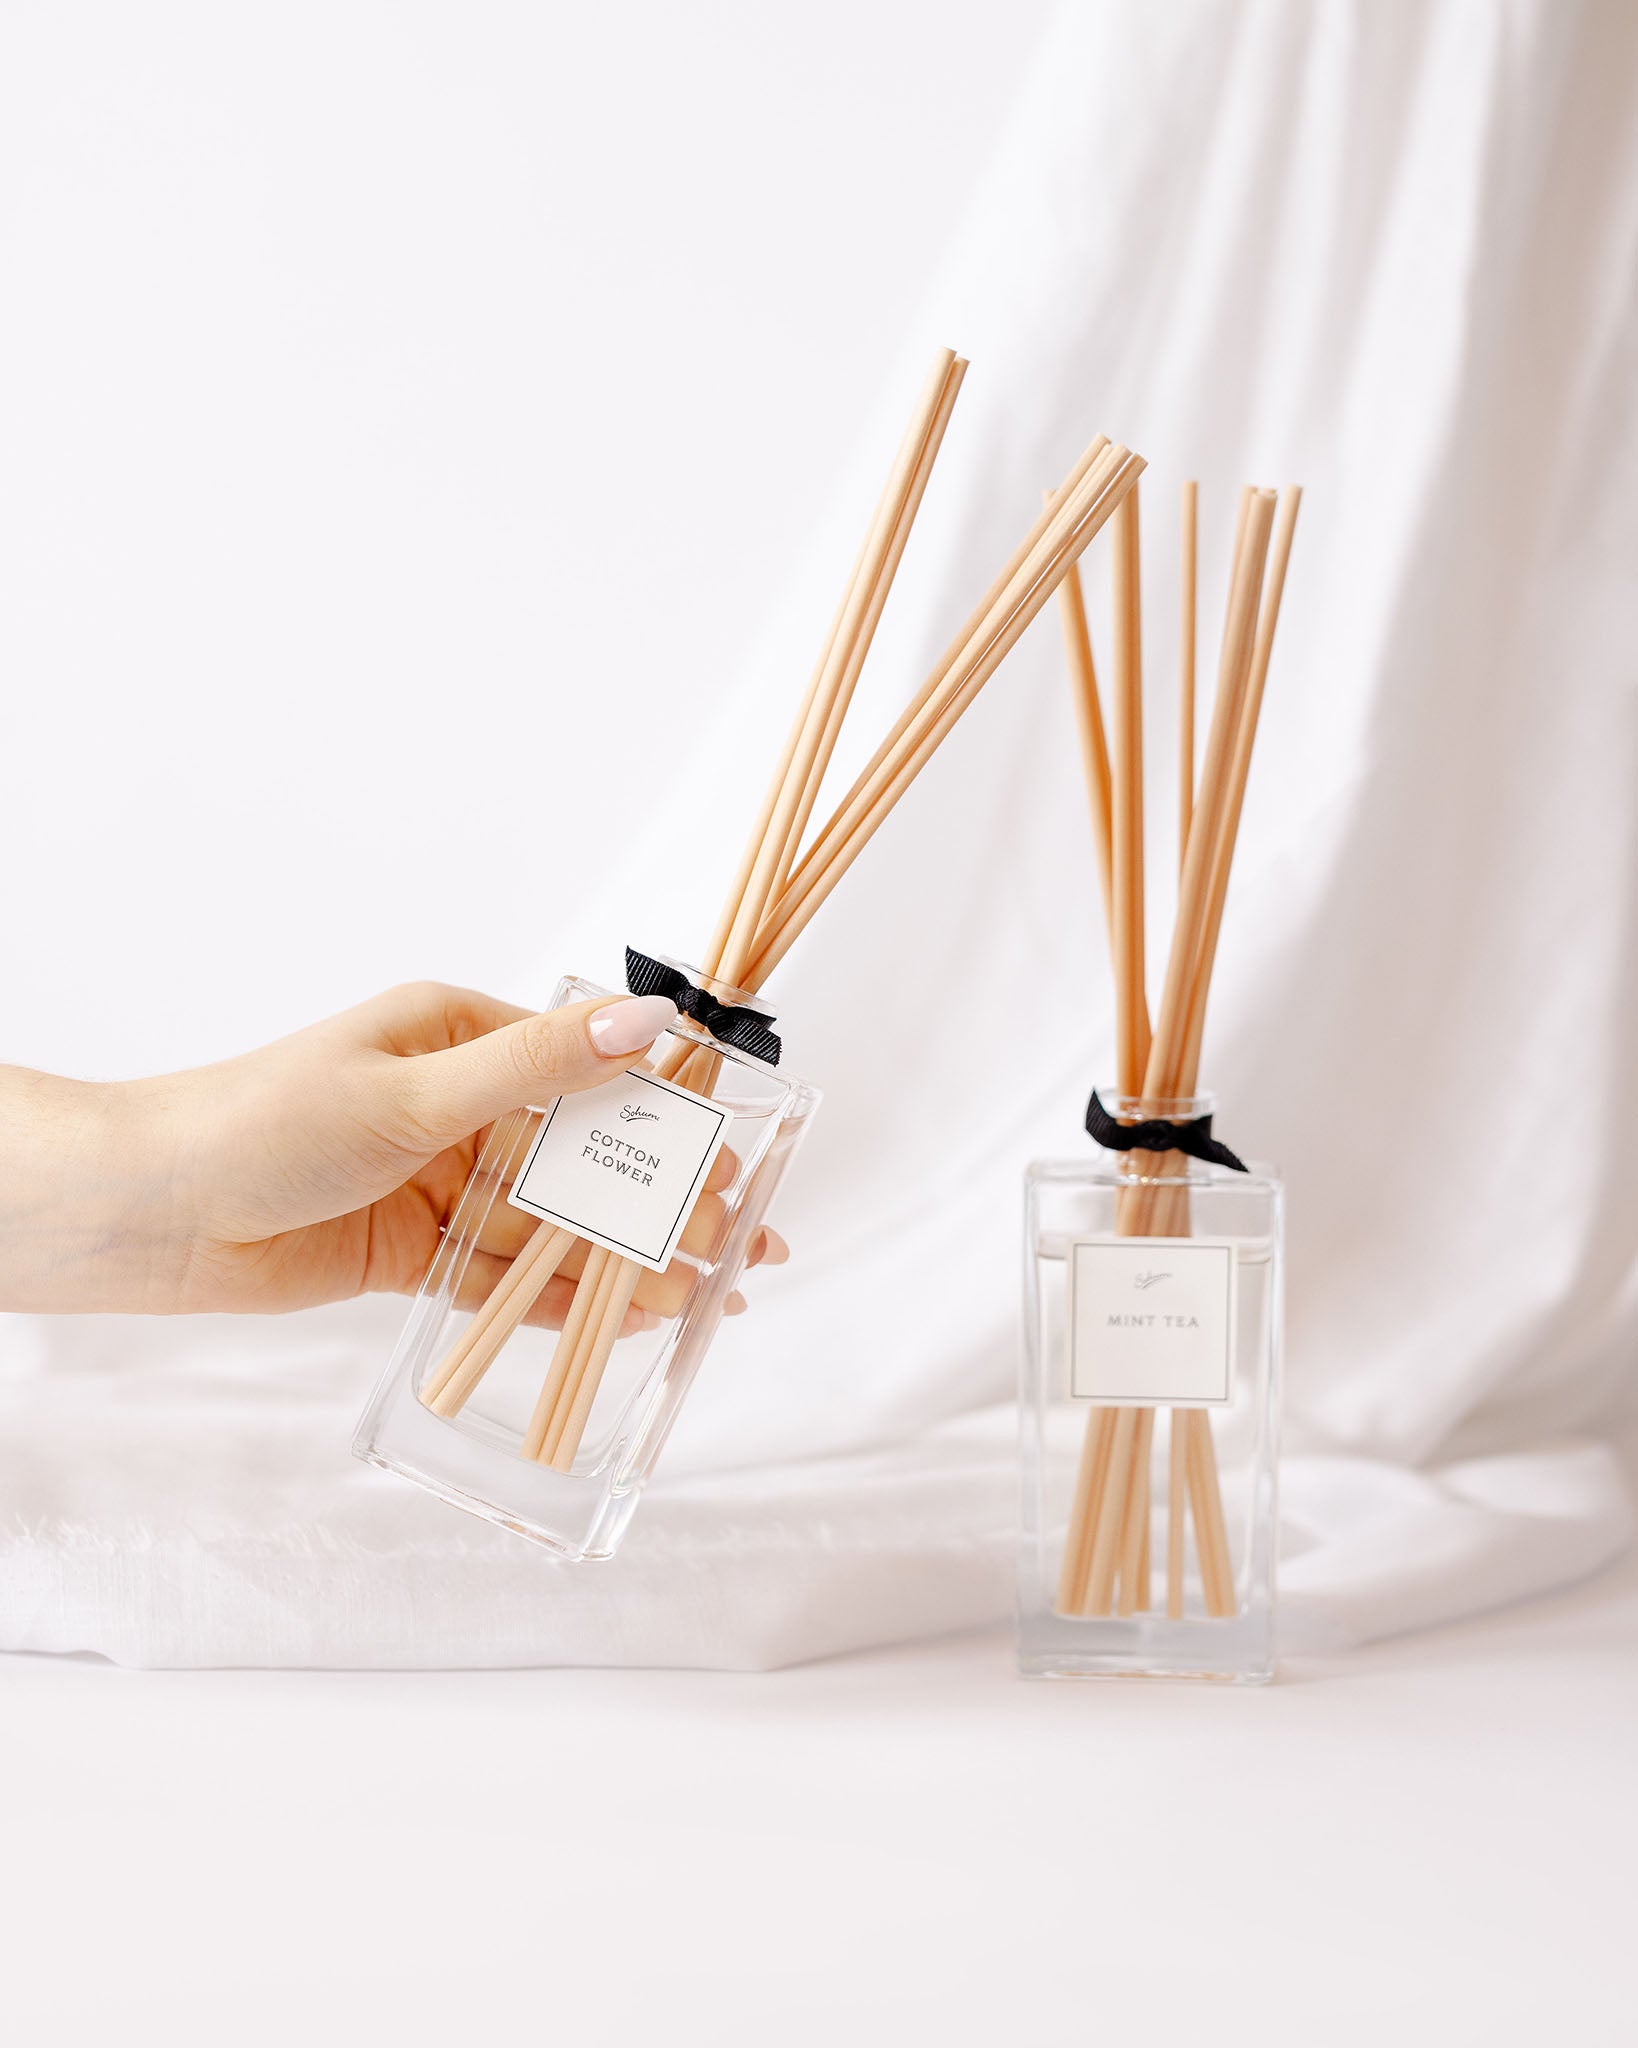 Cotton Flower Reed Diffuser